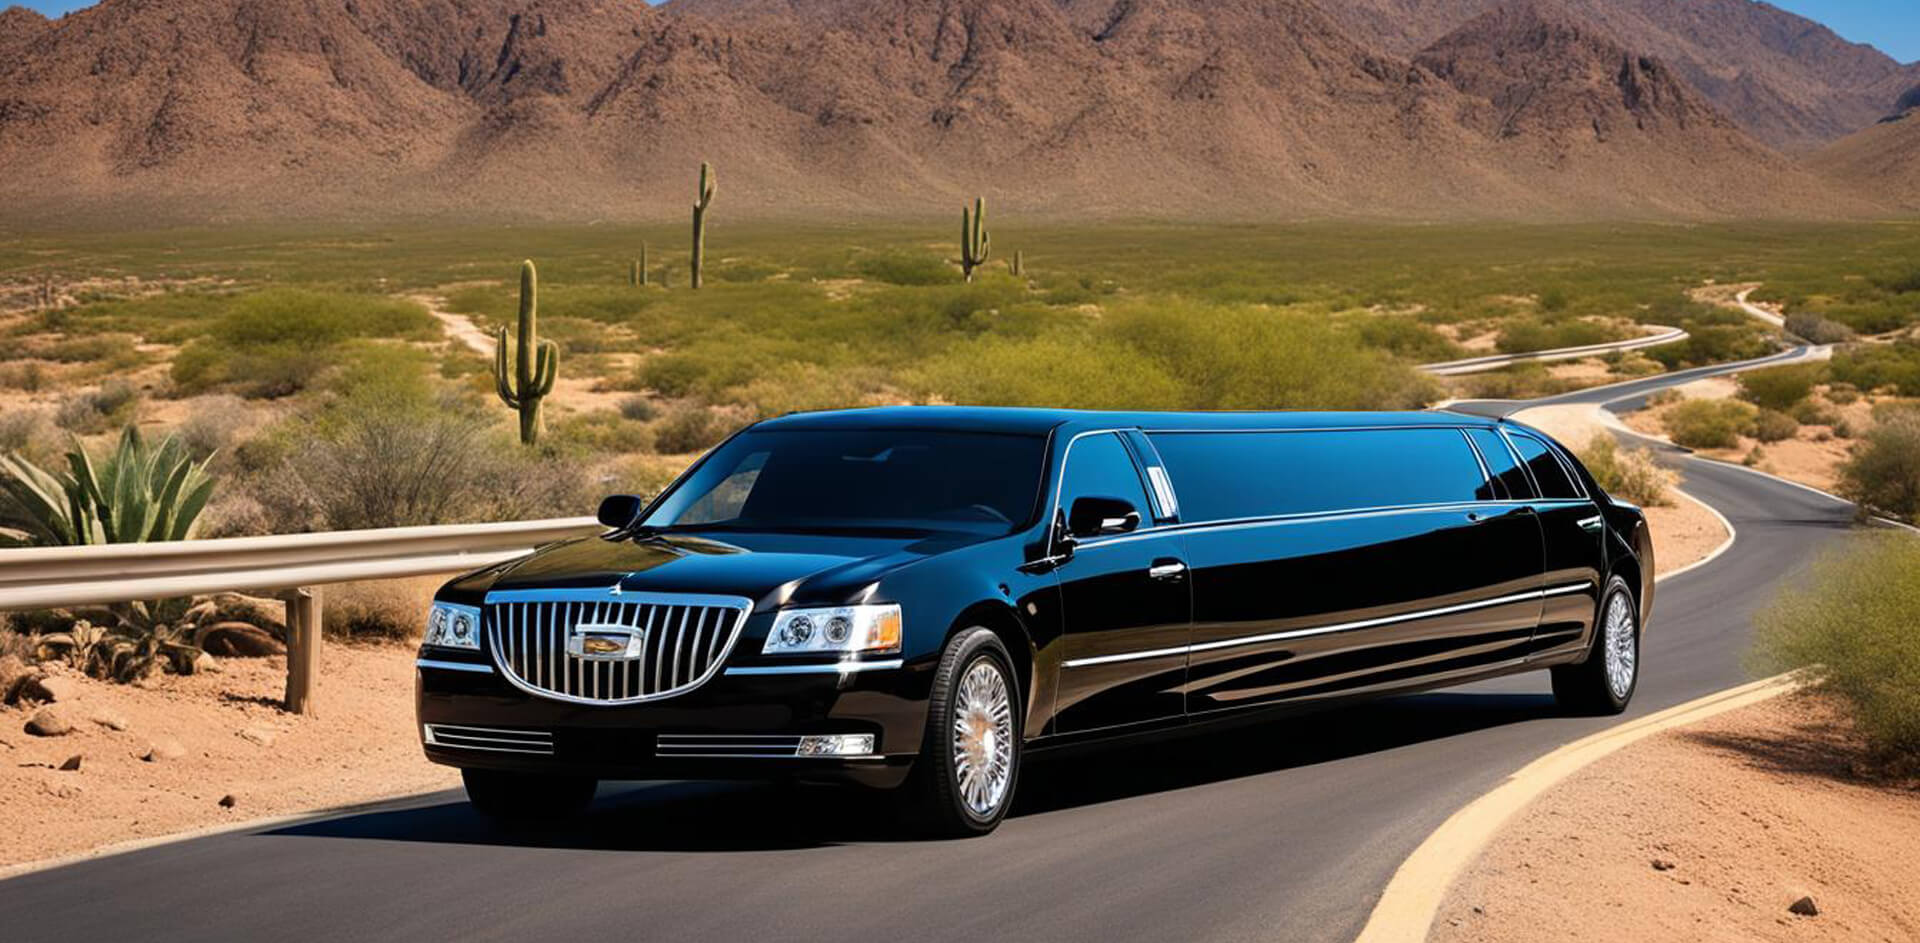 Luxury stretch limos ideal for Fountain Hills journey